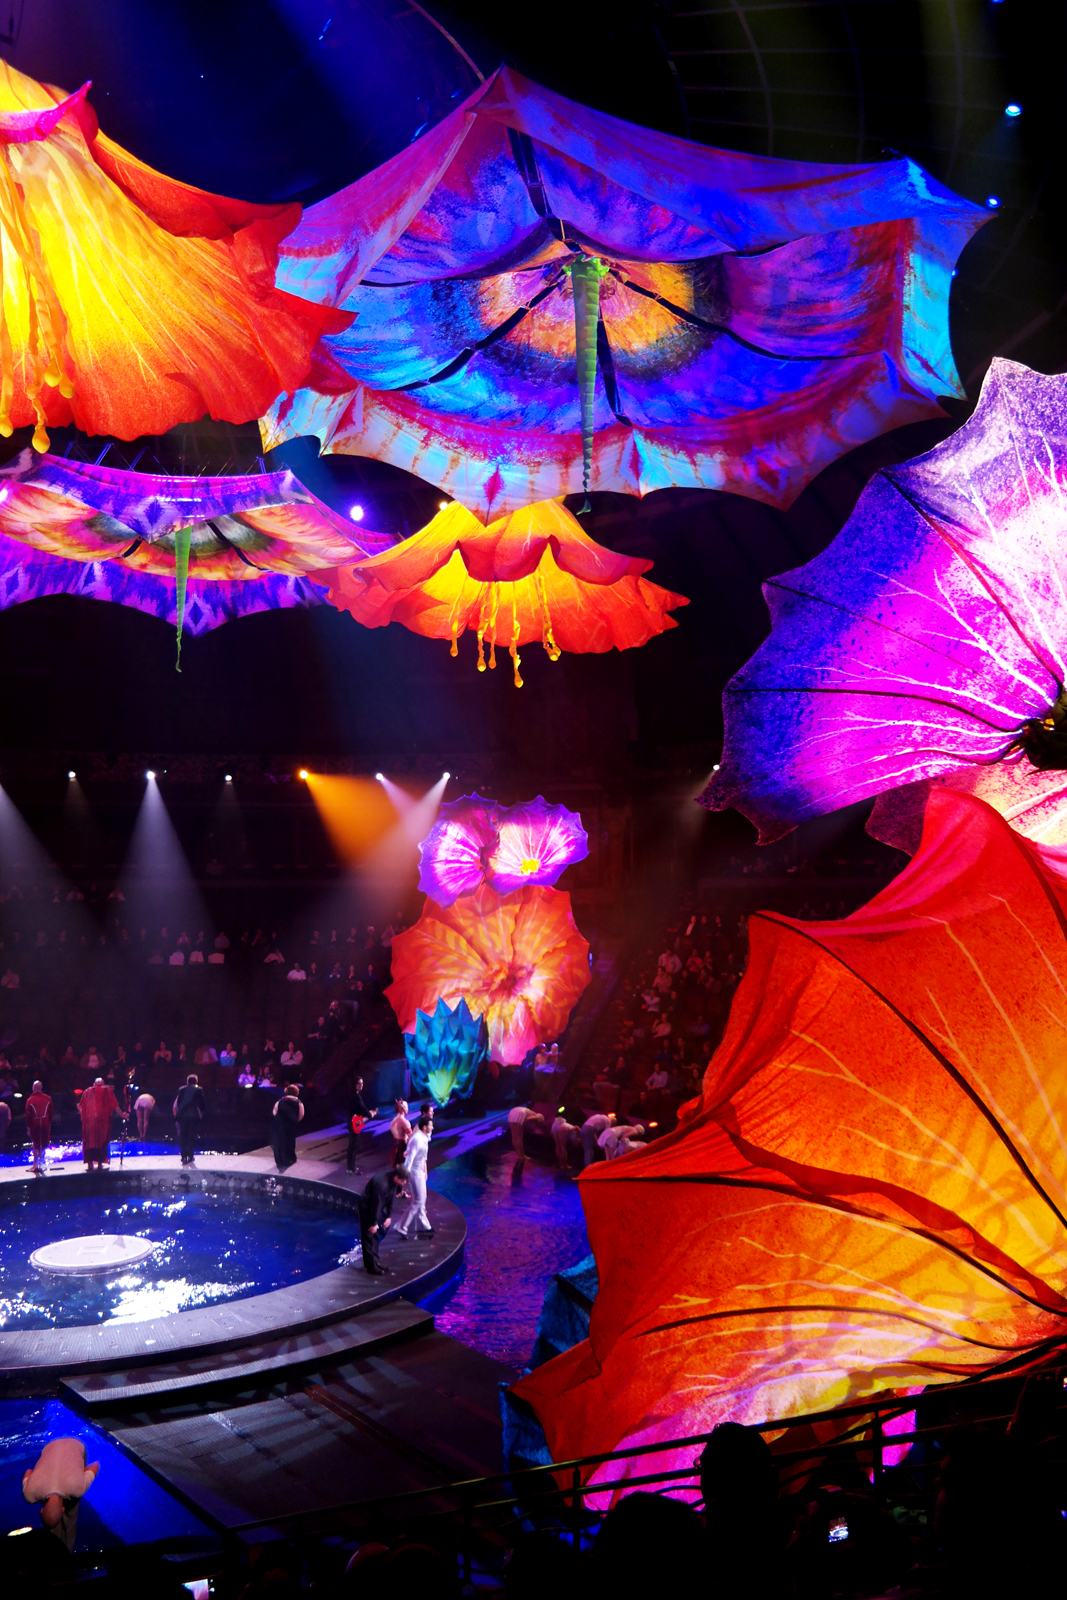 Le-Rêve-The-Dream-le-reve-best-production-show-wynn-las-vegas-Franco-Dragone-spectacle-flowers-end-of-the-show-imagelogger-photo-by-united-states-of-paris-blog